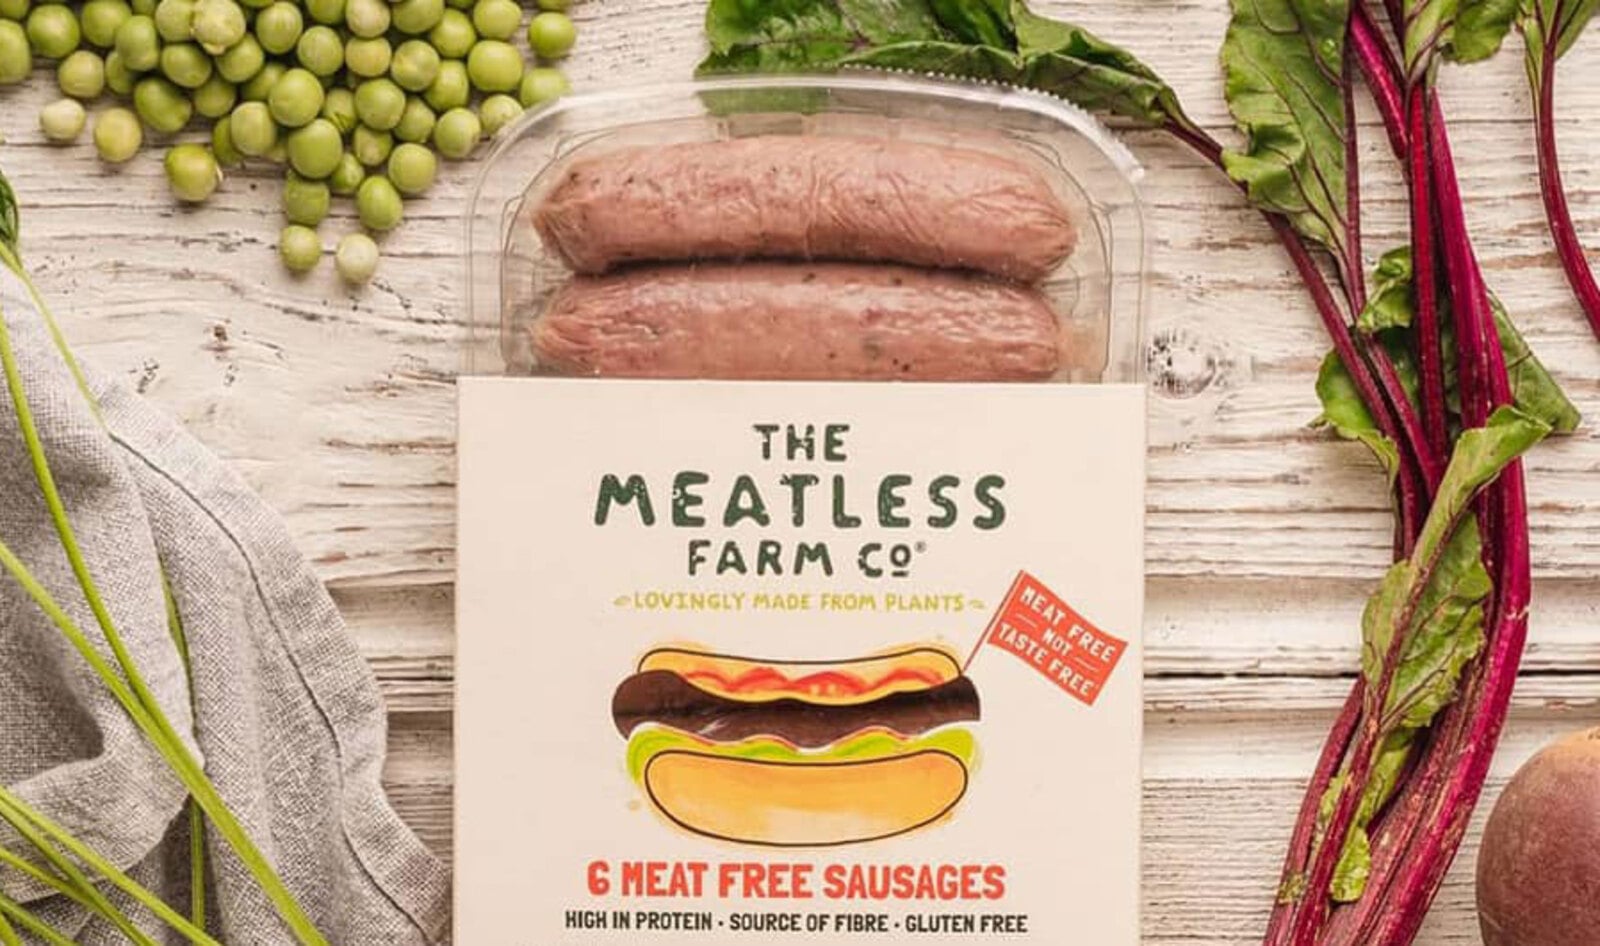 Vegan Company Urges Supermarkets to Change “Meat Aisle” to “Protein Aisle”